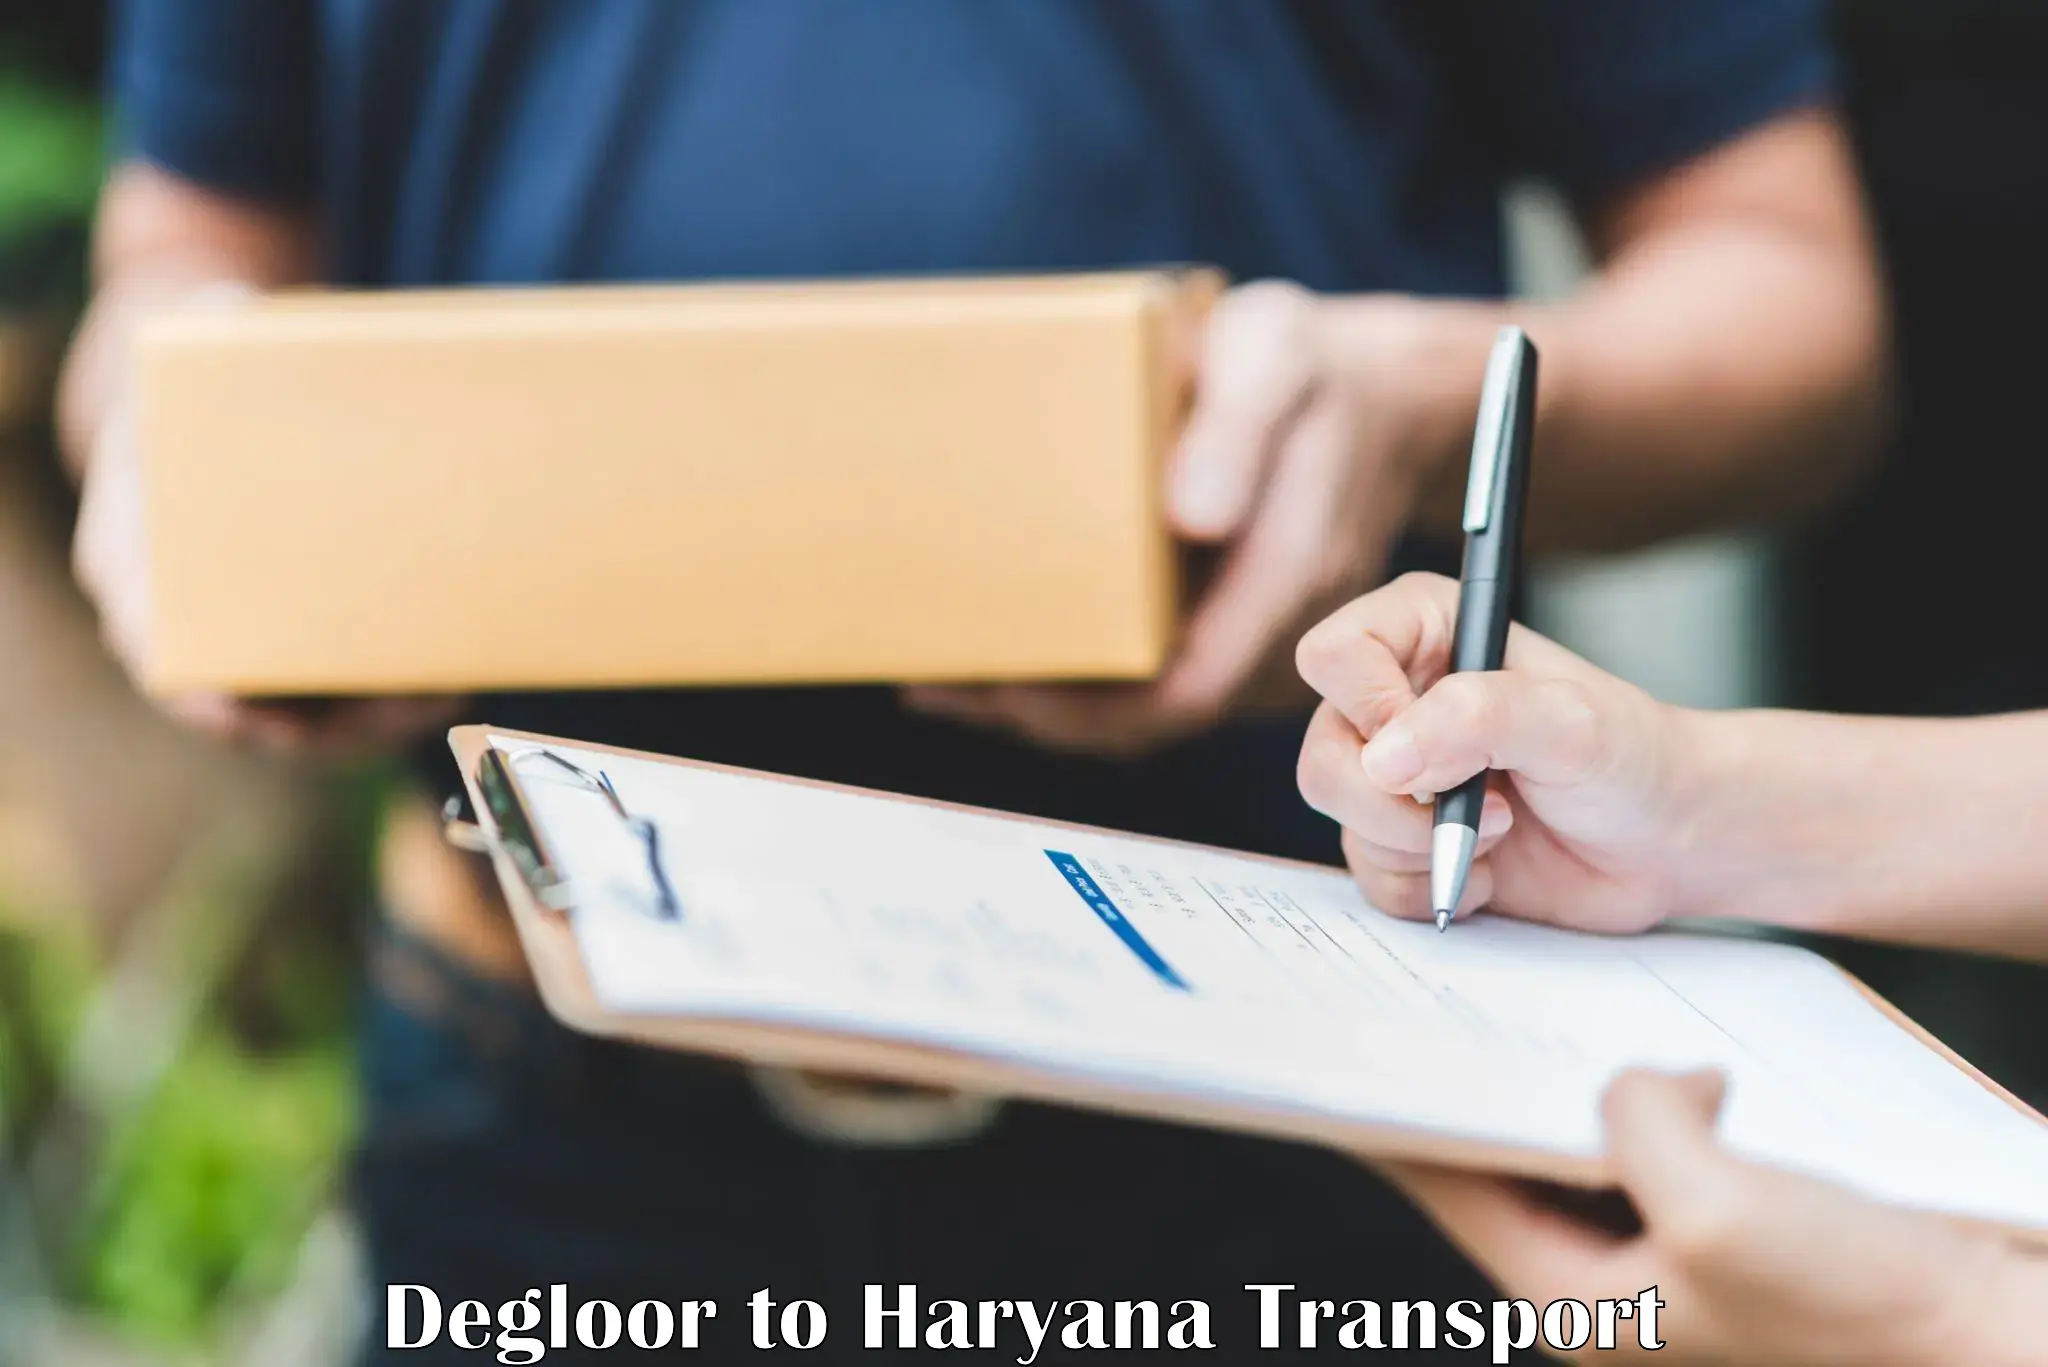 Two wheeler transport services Degloor to Gurgaon